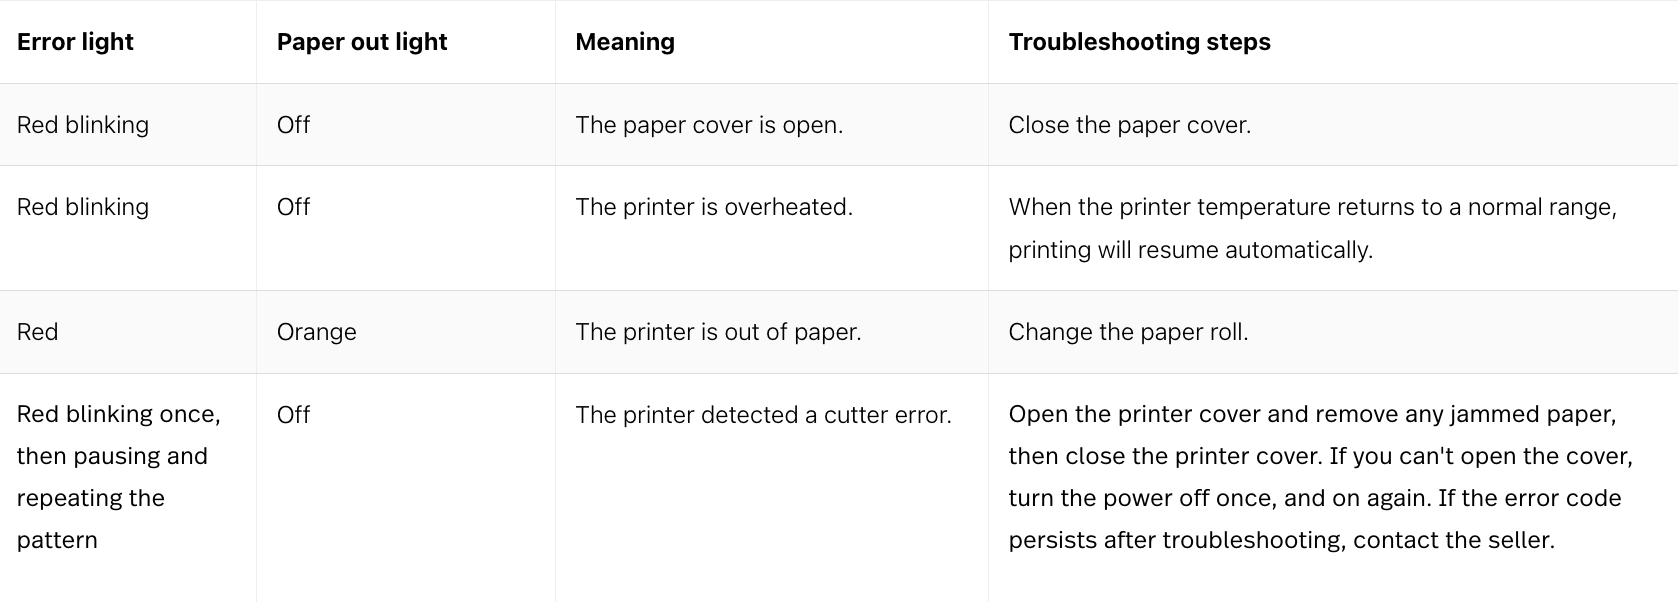 Table of printer light codes, their meanings, and troubleshooting steps.